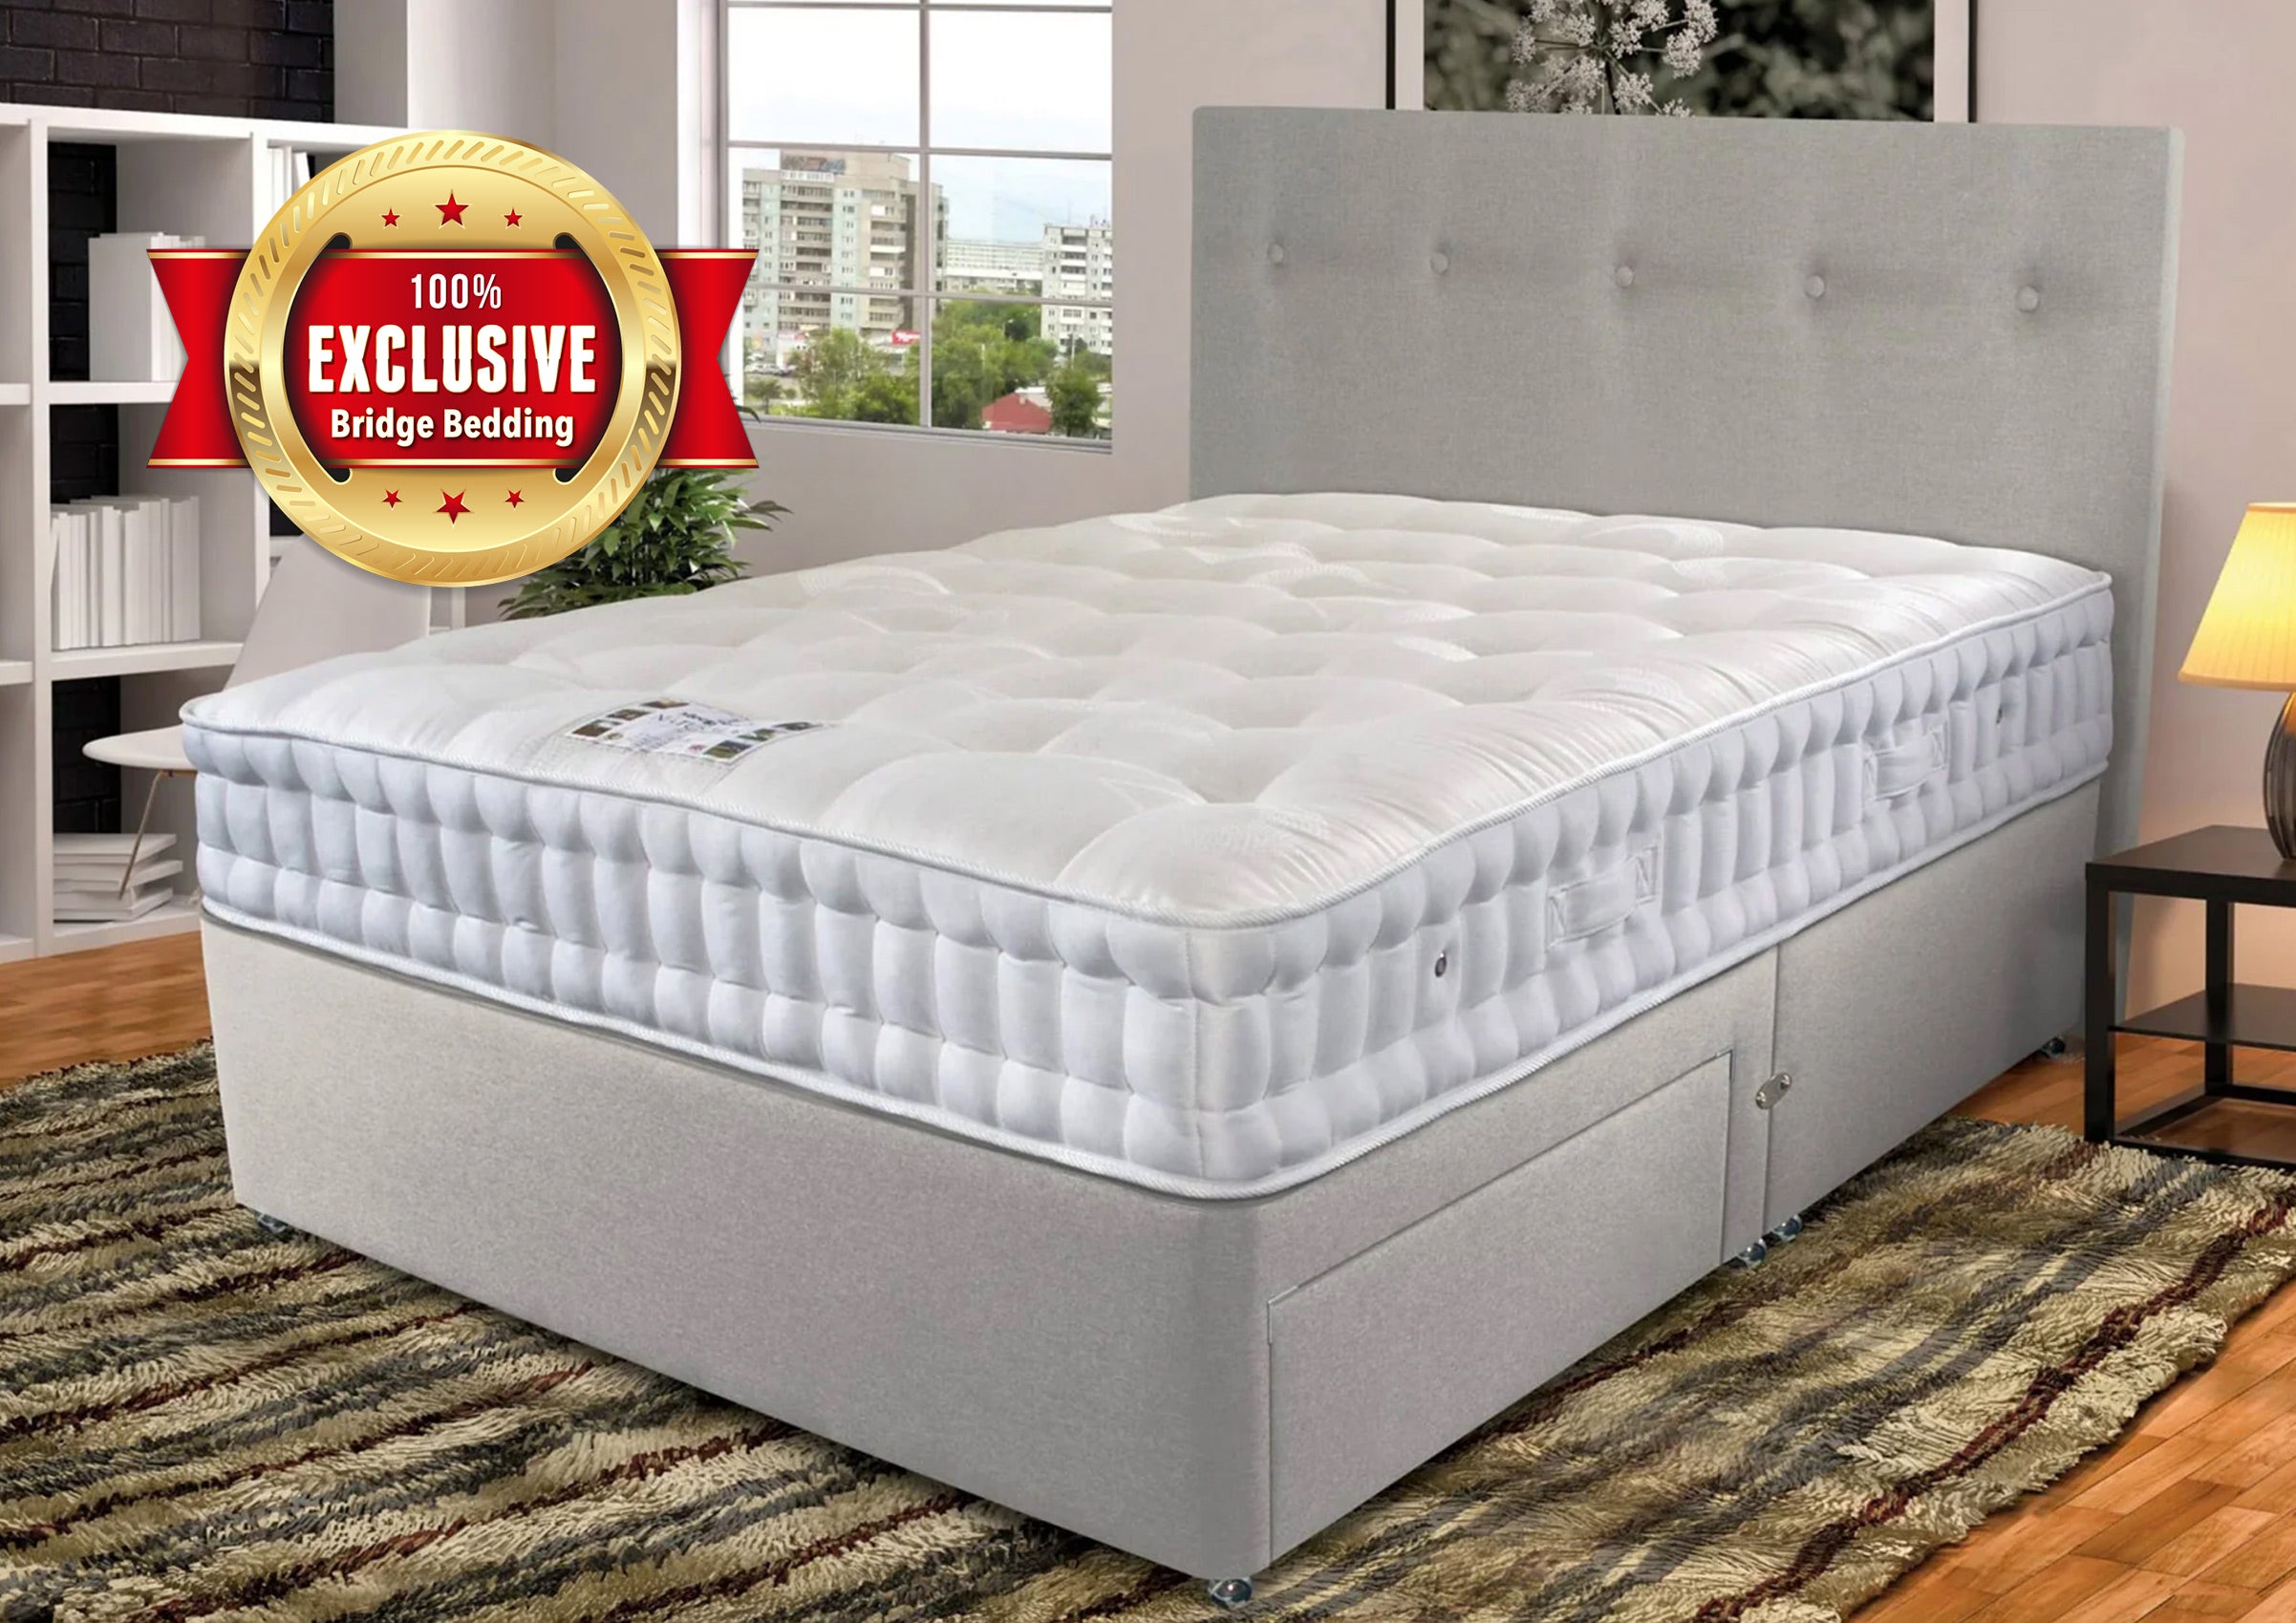 Sleepeezee Natural Chelsea 1400 Mattress Express Delivery